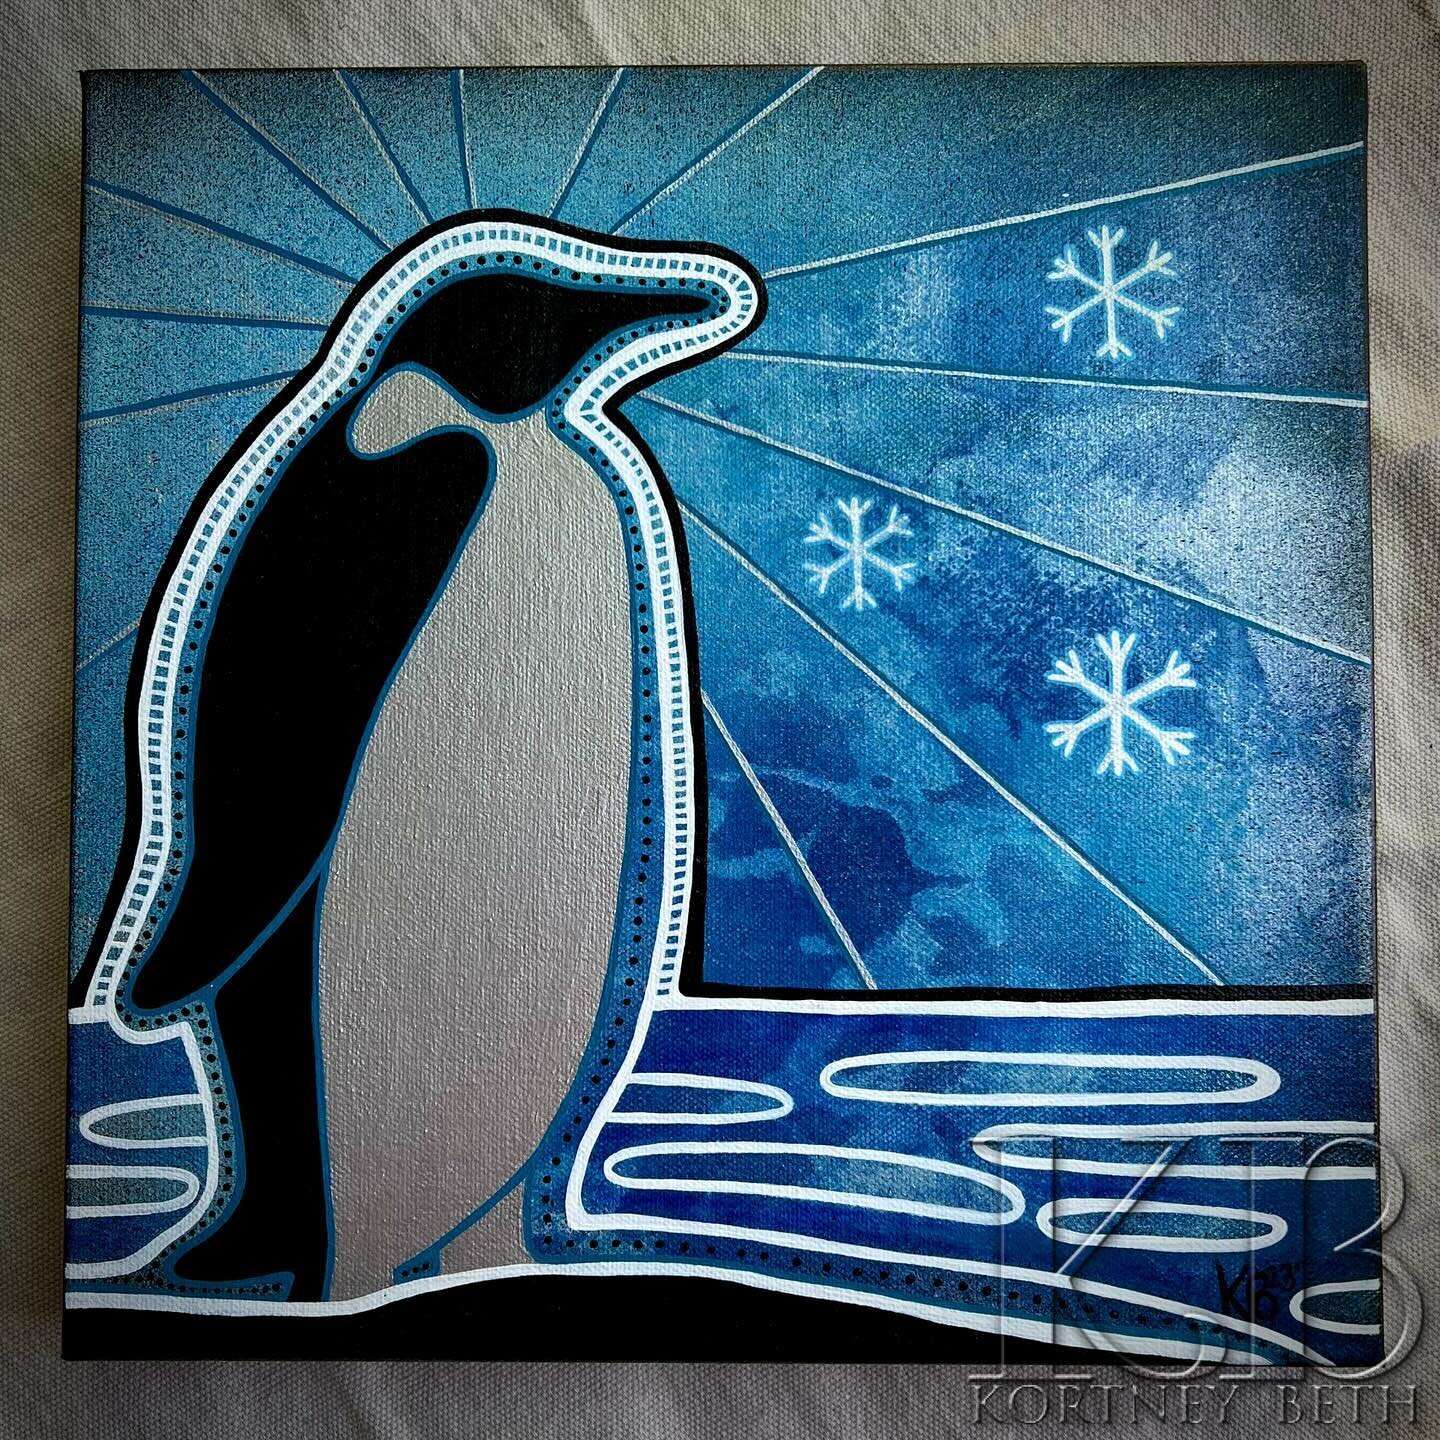 🐧 &ldquo;Penguin Spirit&rdquo; 🐧
Acrylic on Canvas 
12&rdquo;x12&rdquo; 
💕Available💕

In the world of these incredible birds, we find valuable life lessons:

❤️ Resilience: Like penguins, we can conquer adversity with unwavering strength.

👨&zwj